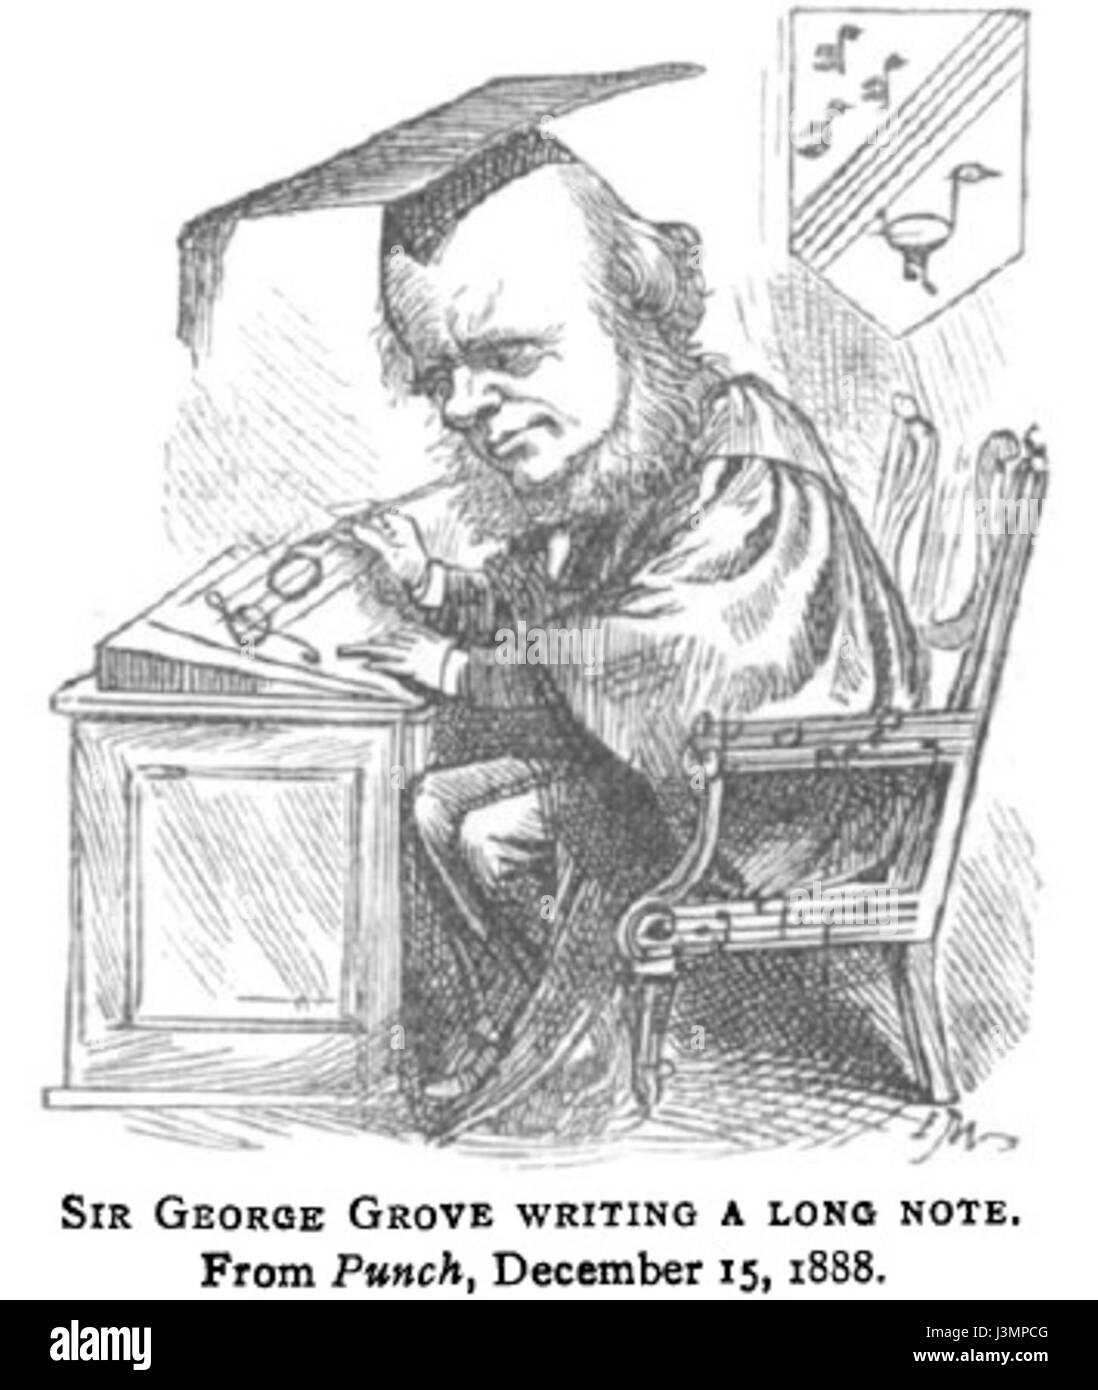 George grove caricature Banque D'Images